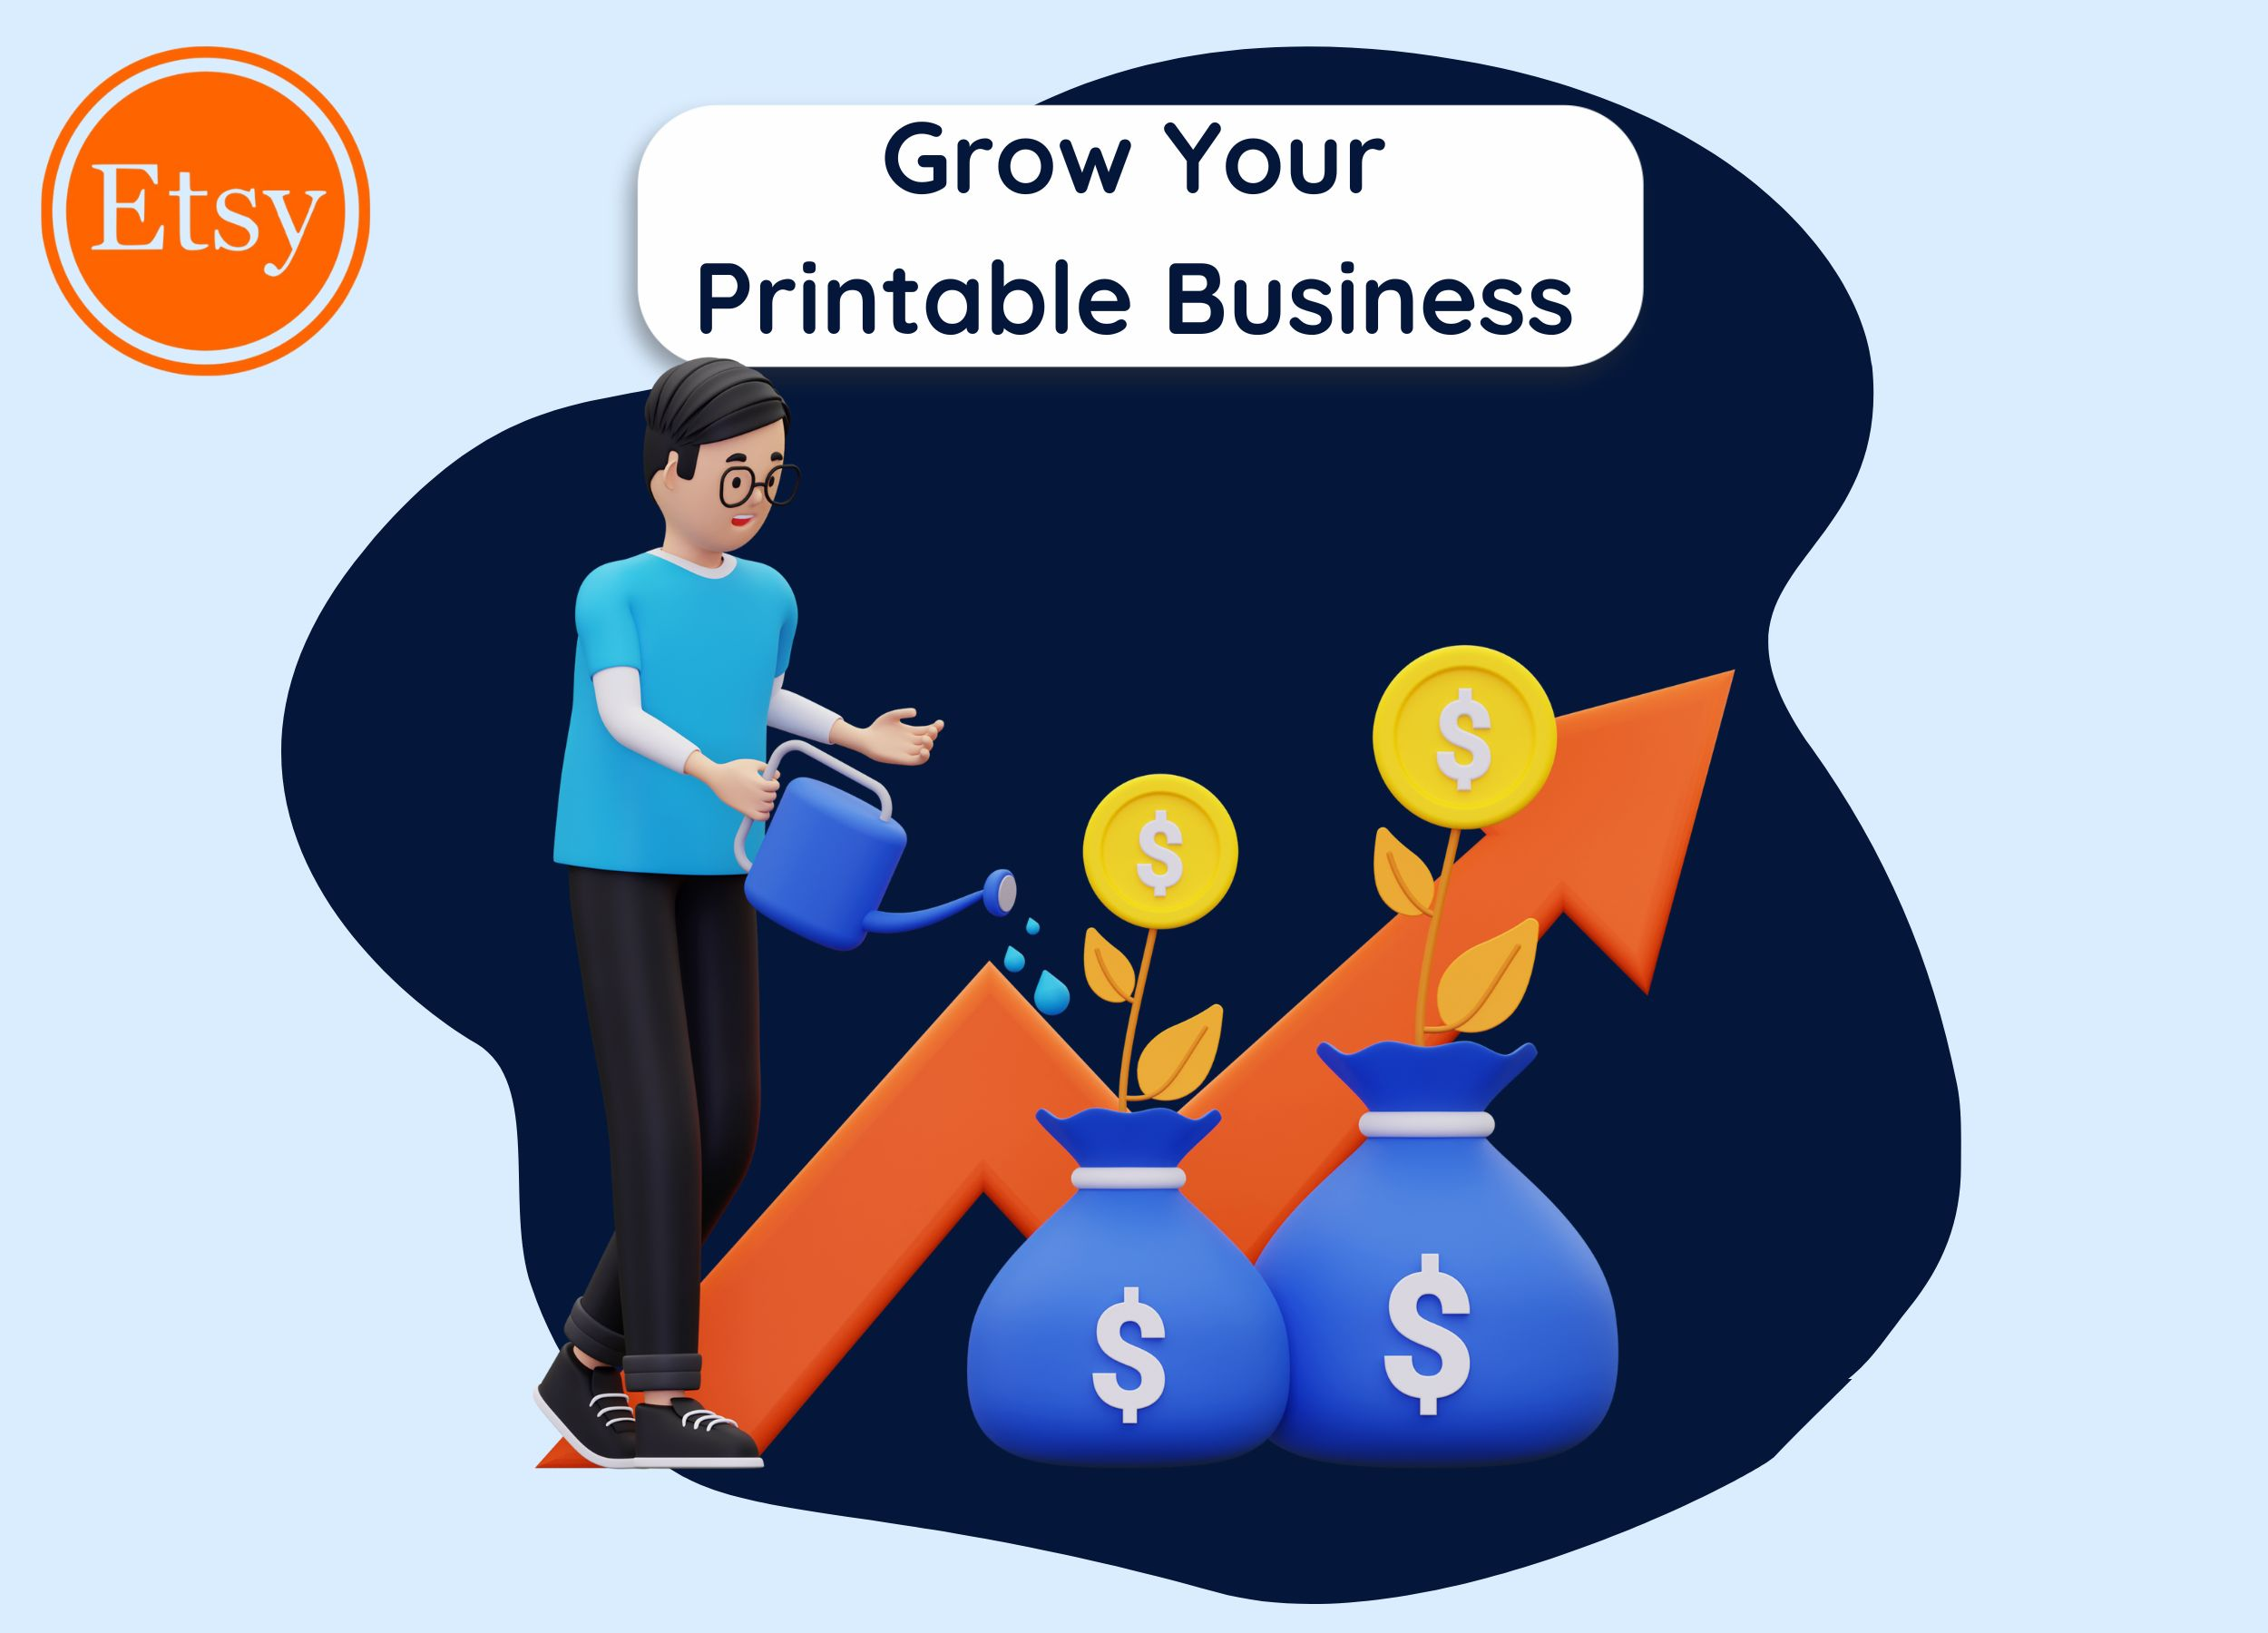 Expanding printable business to other platforms